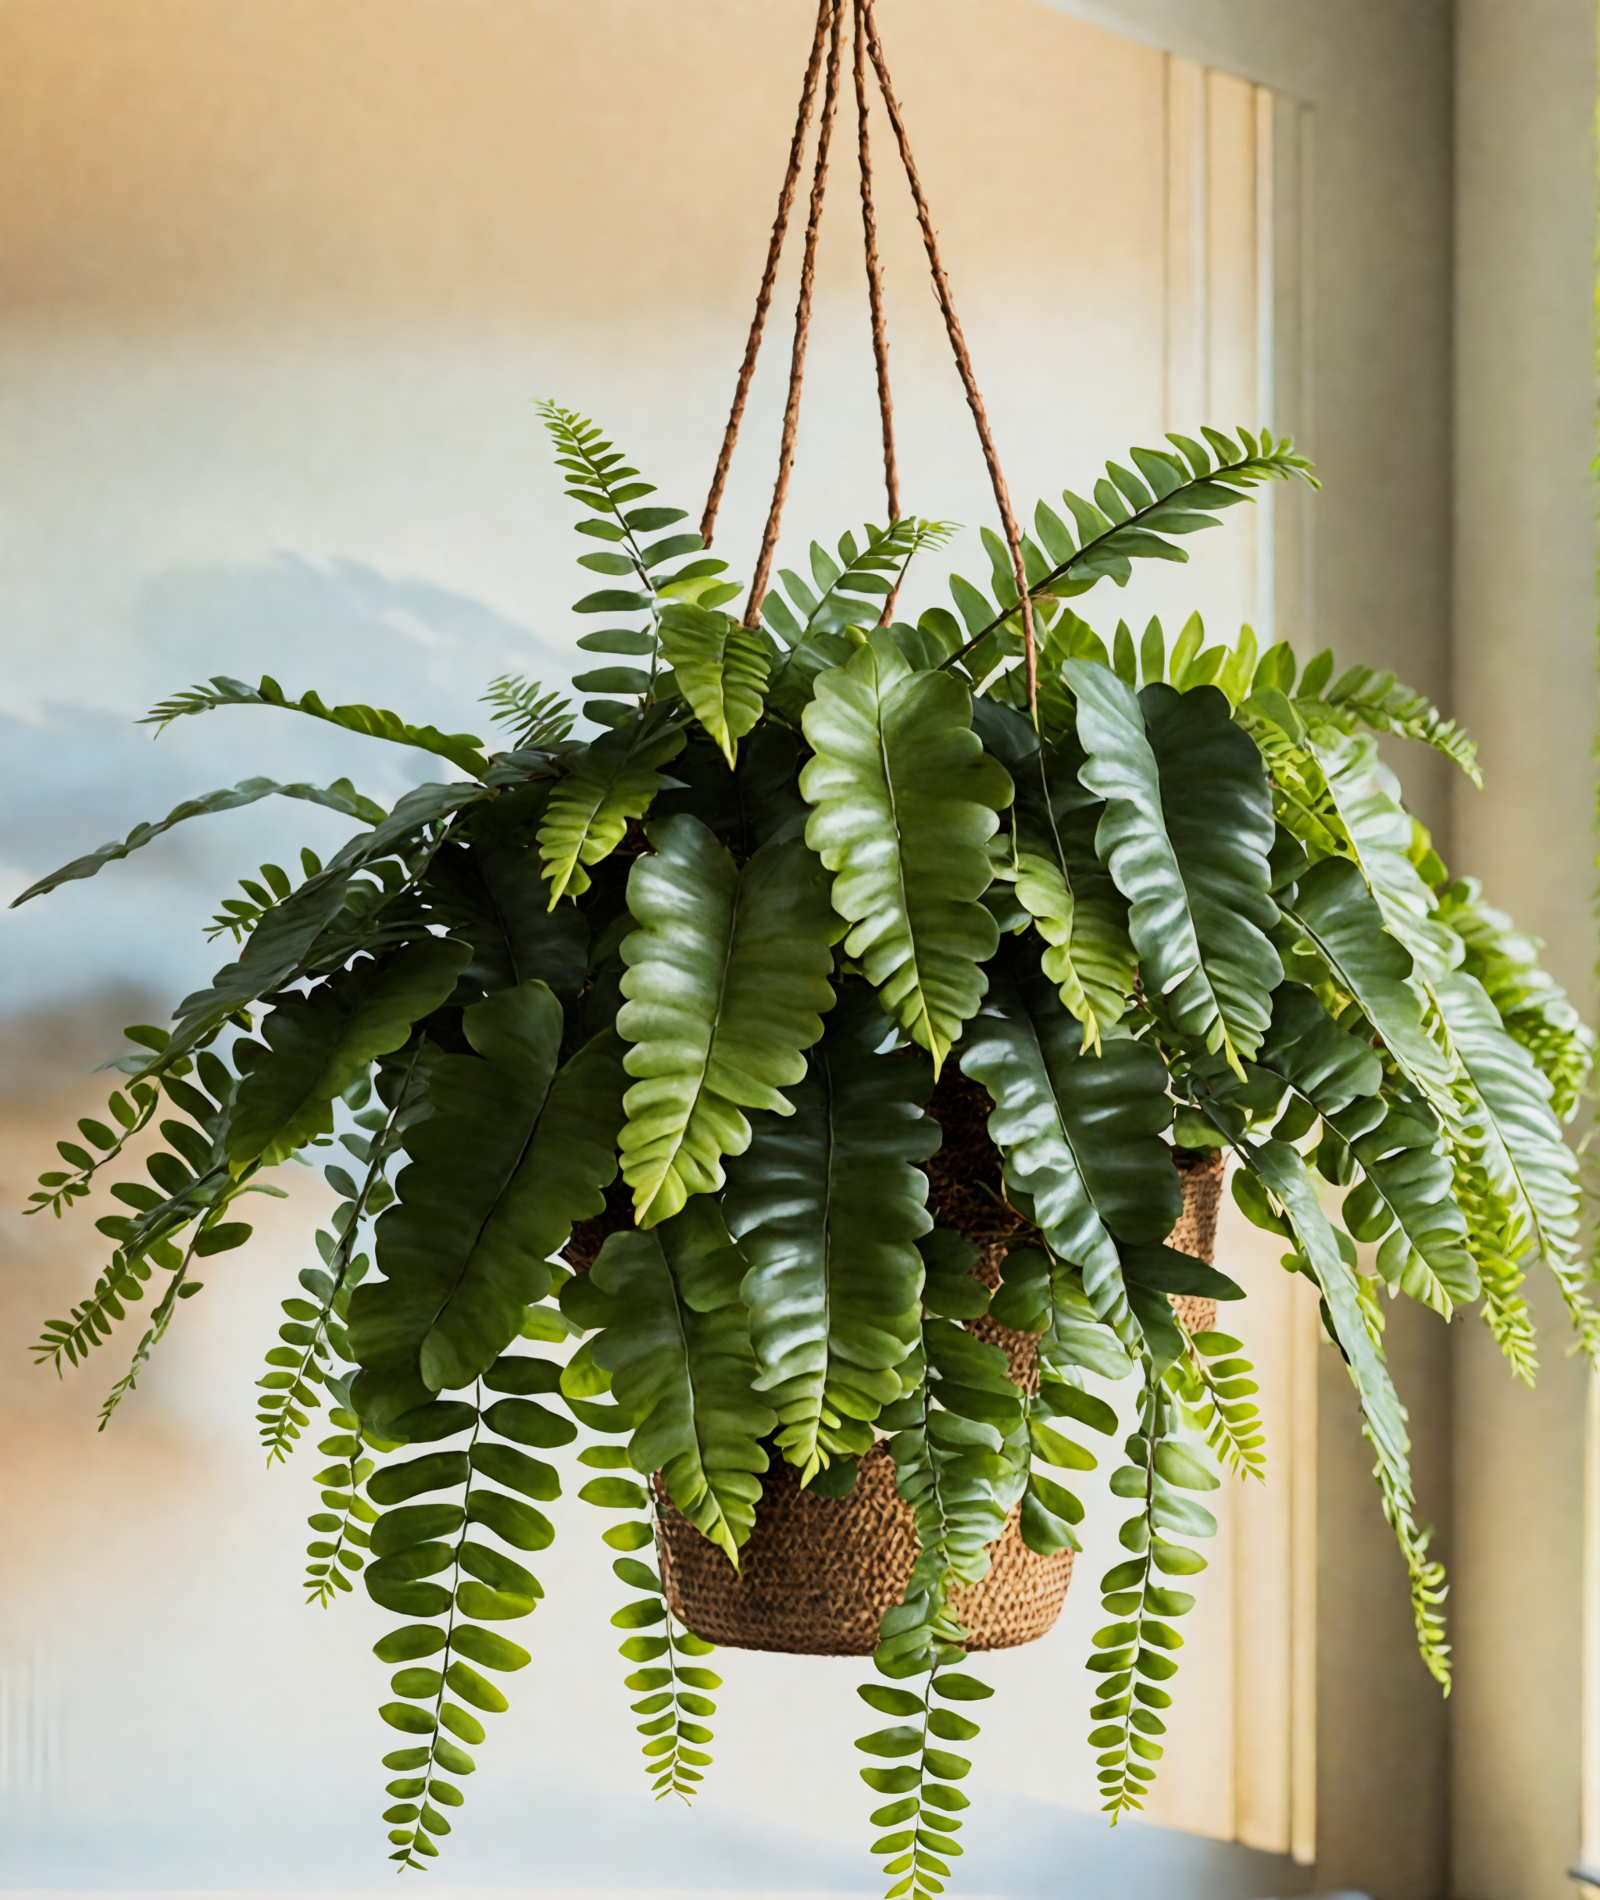 Nephrolepis exaltata (Boston fern) in a hanging planter, with clear indoor lighting and neutral decor.